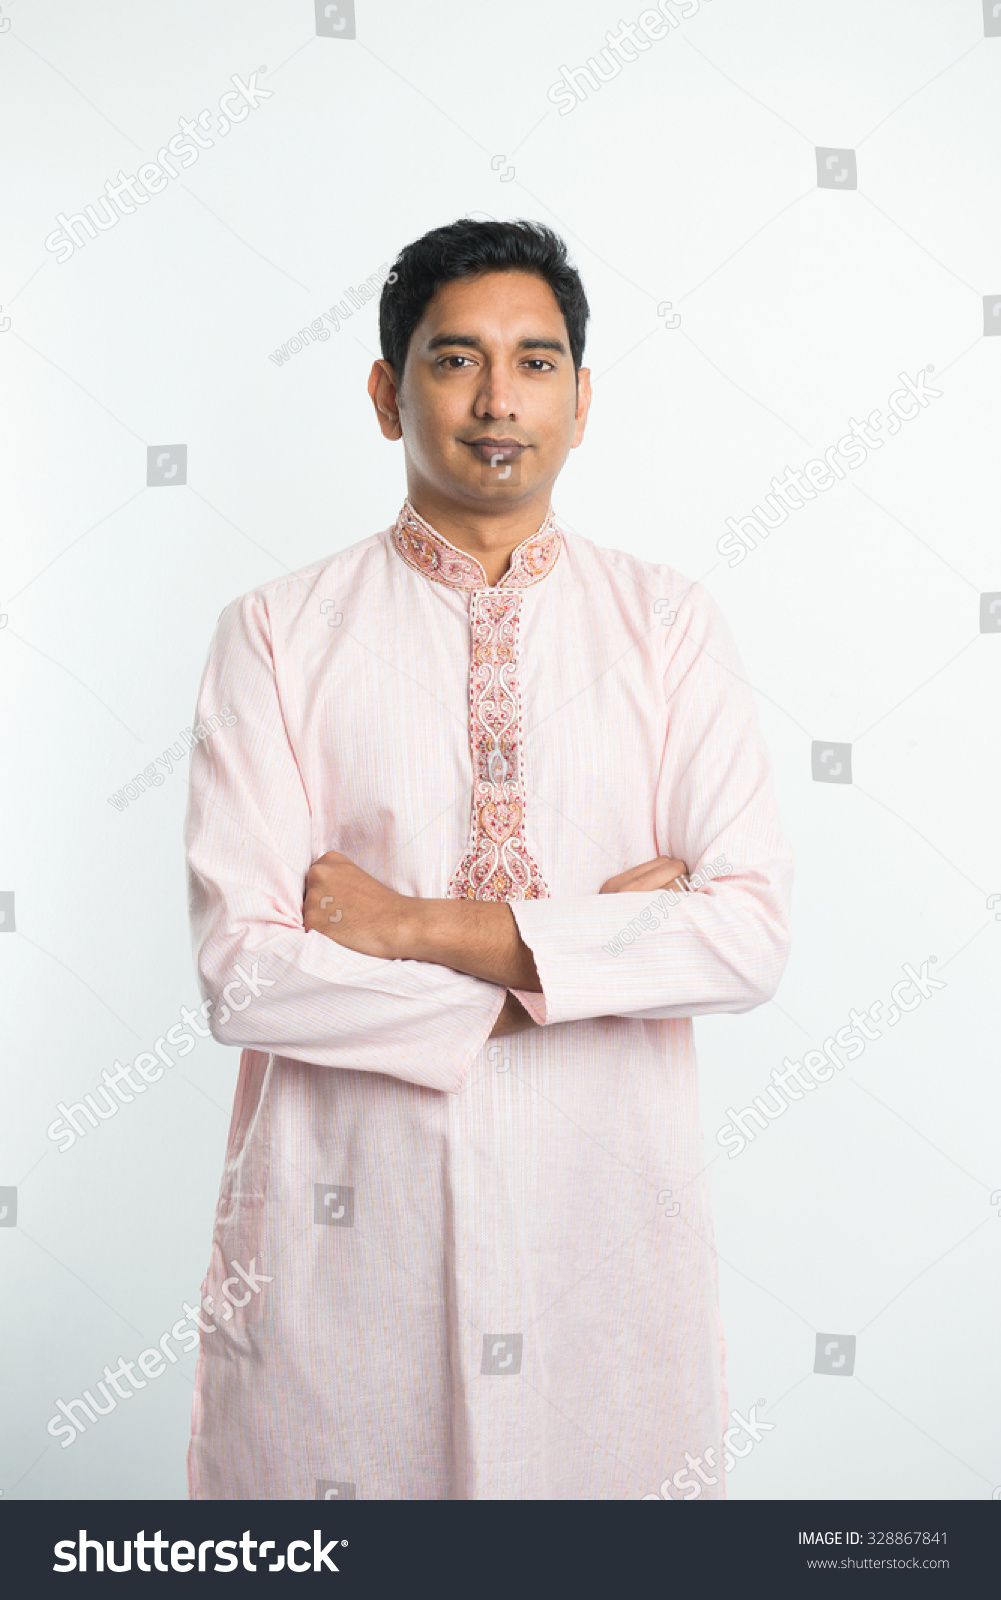 traditional indian male #328867841